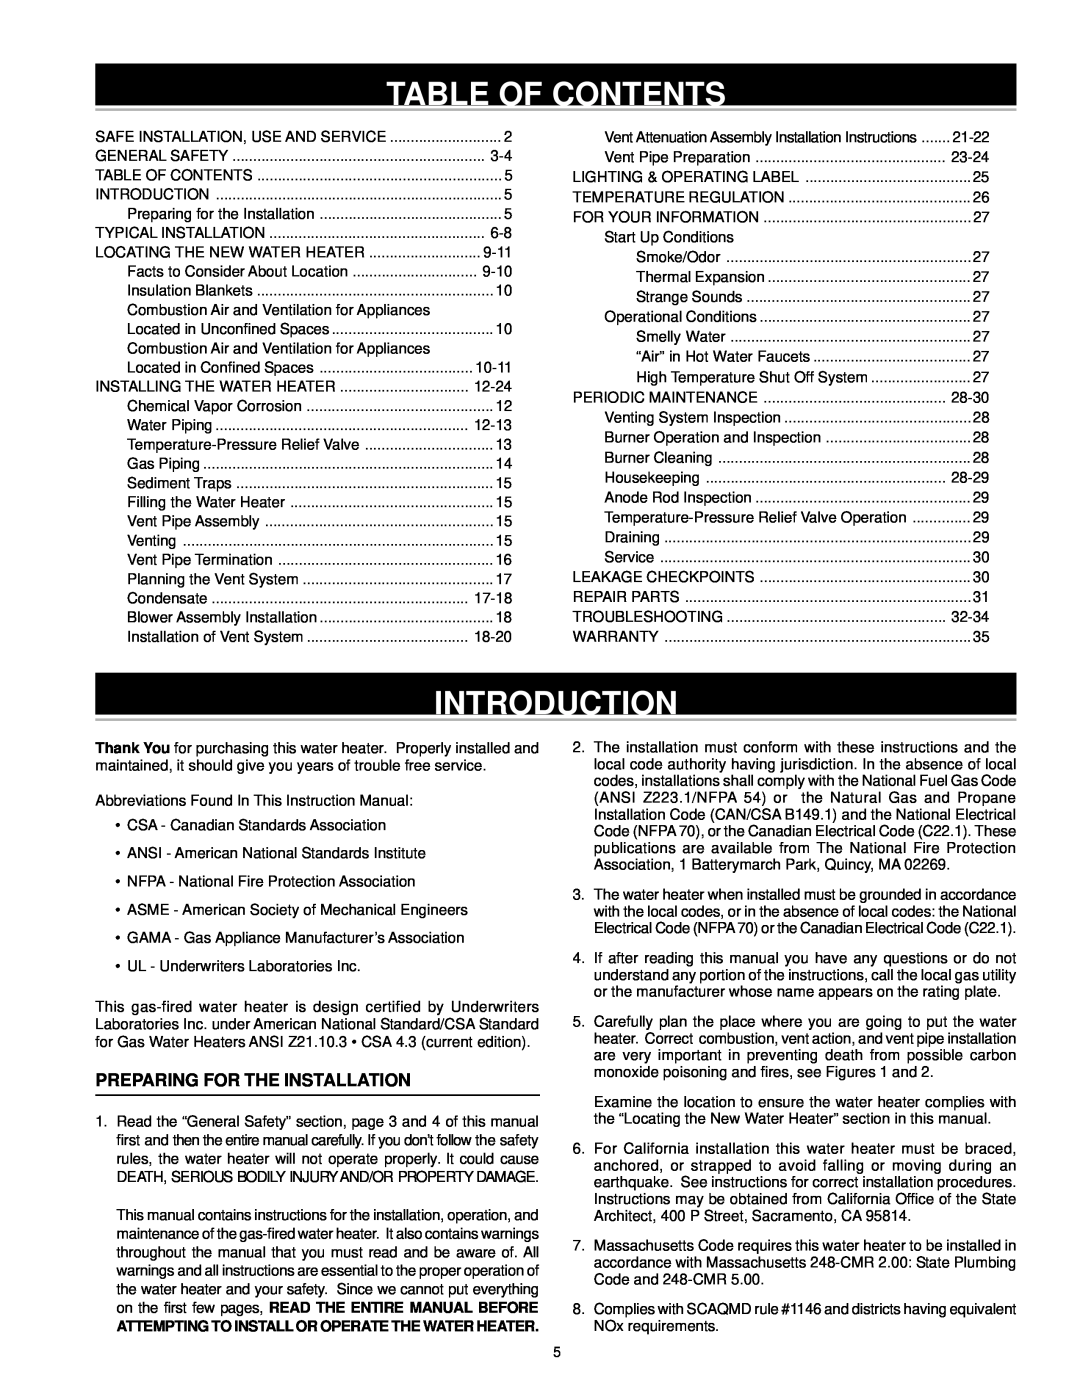 A.O. Smith ARGSS02708 instruction manual Table Of Contents, Introduction, Preparing For The Installation 